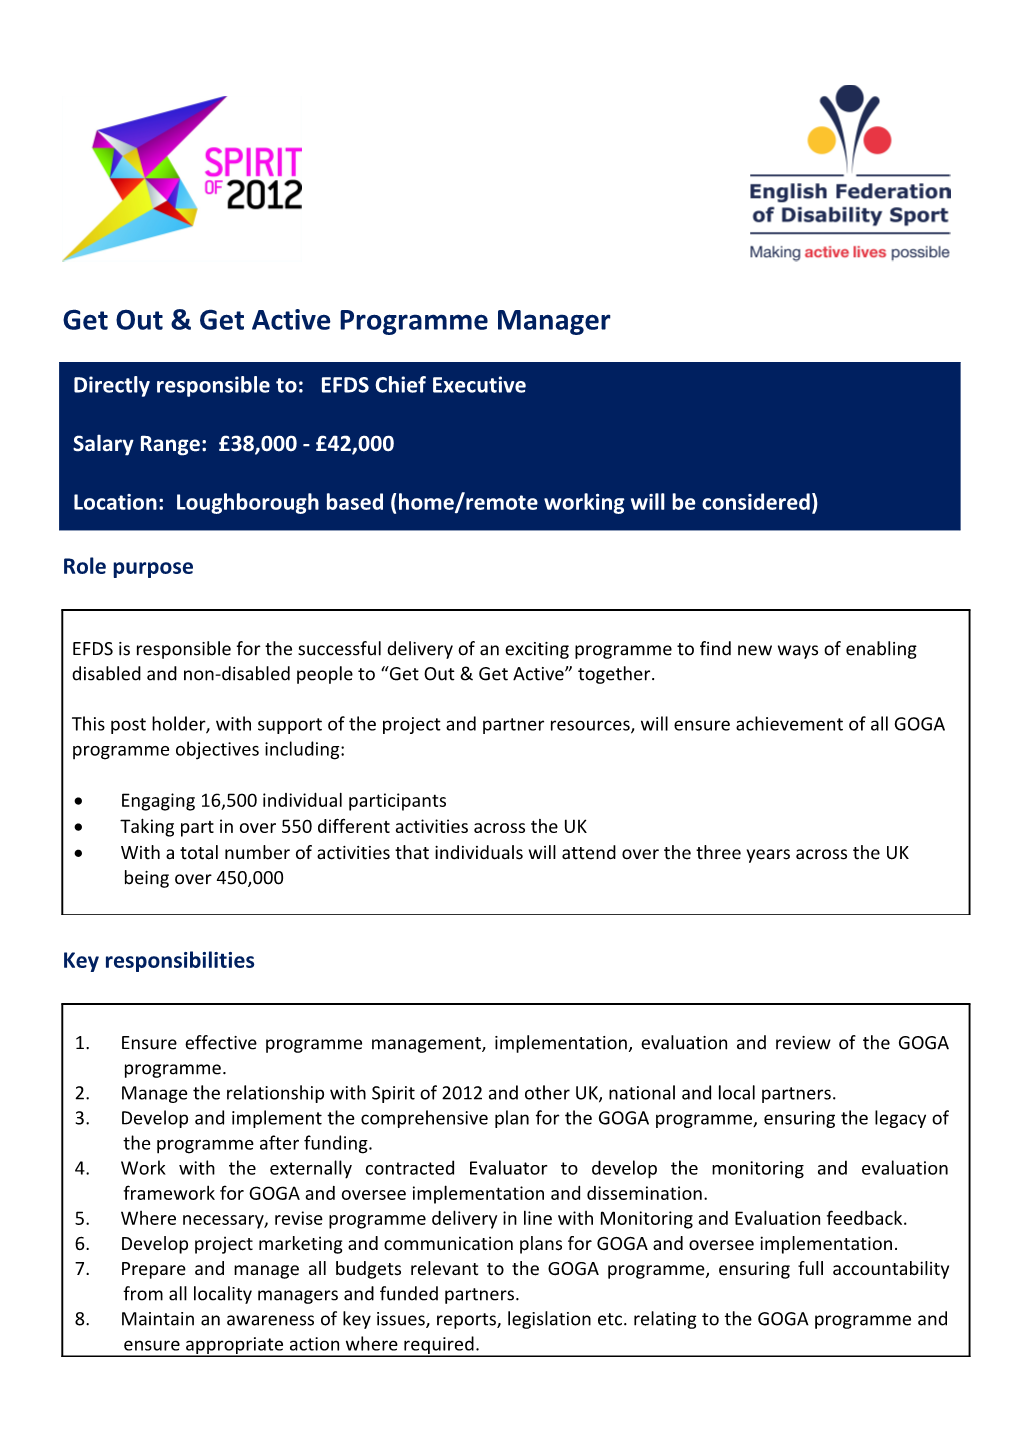 Get out Get Active Programme Manager